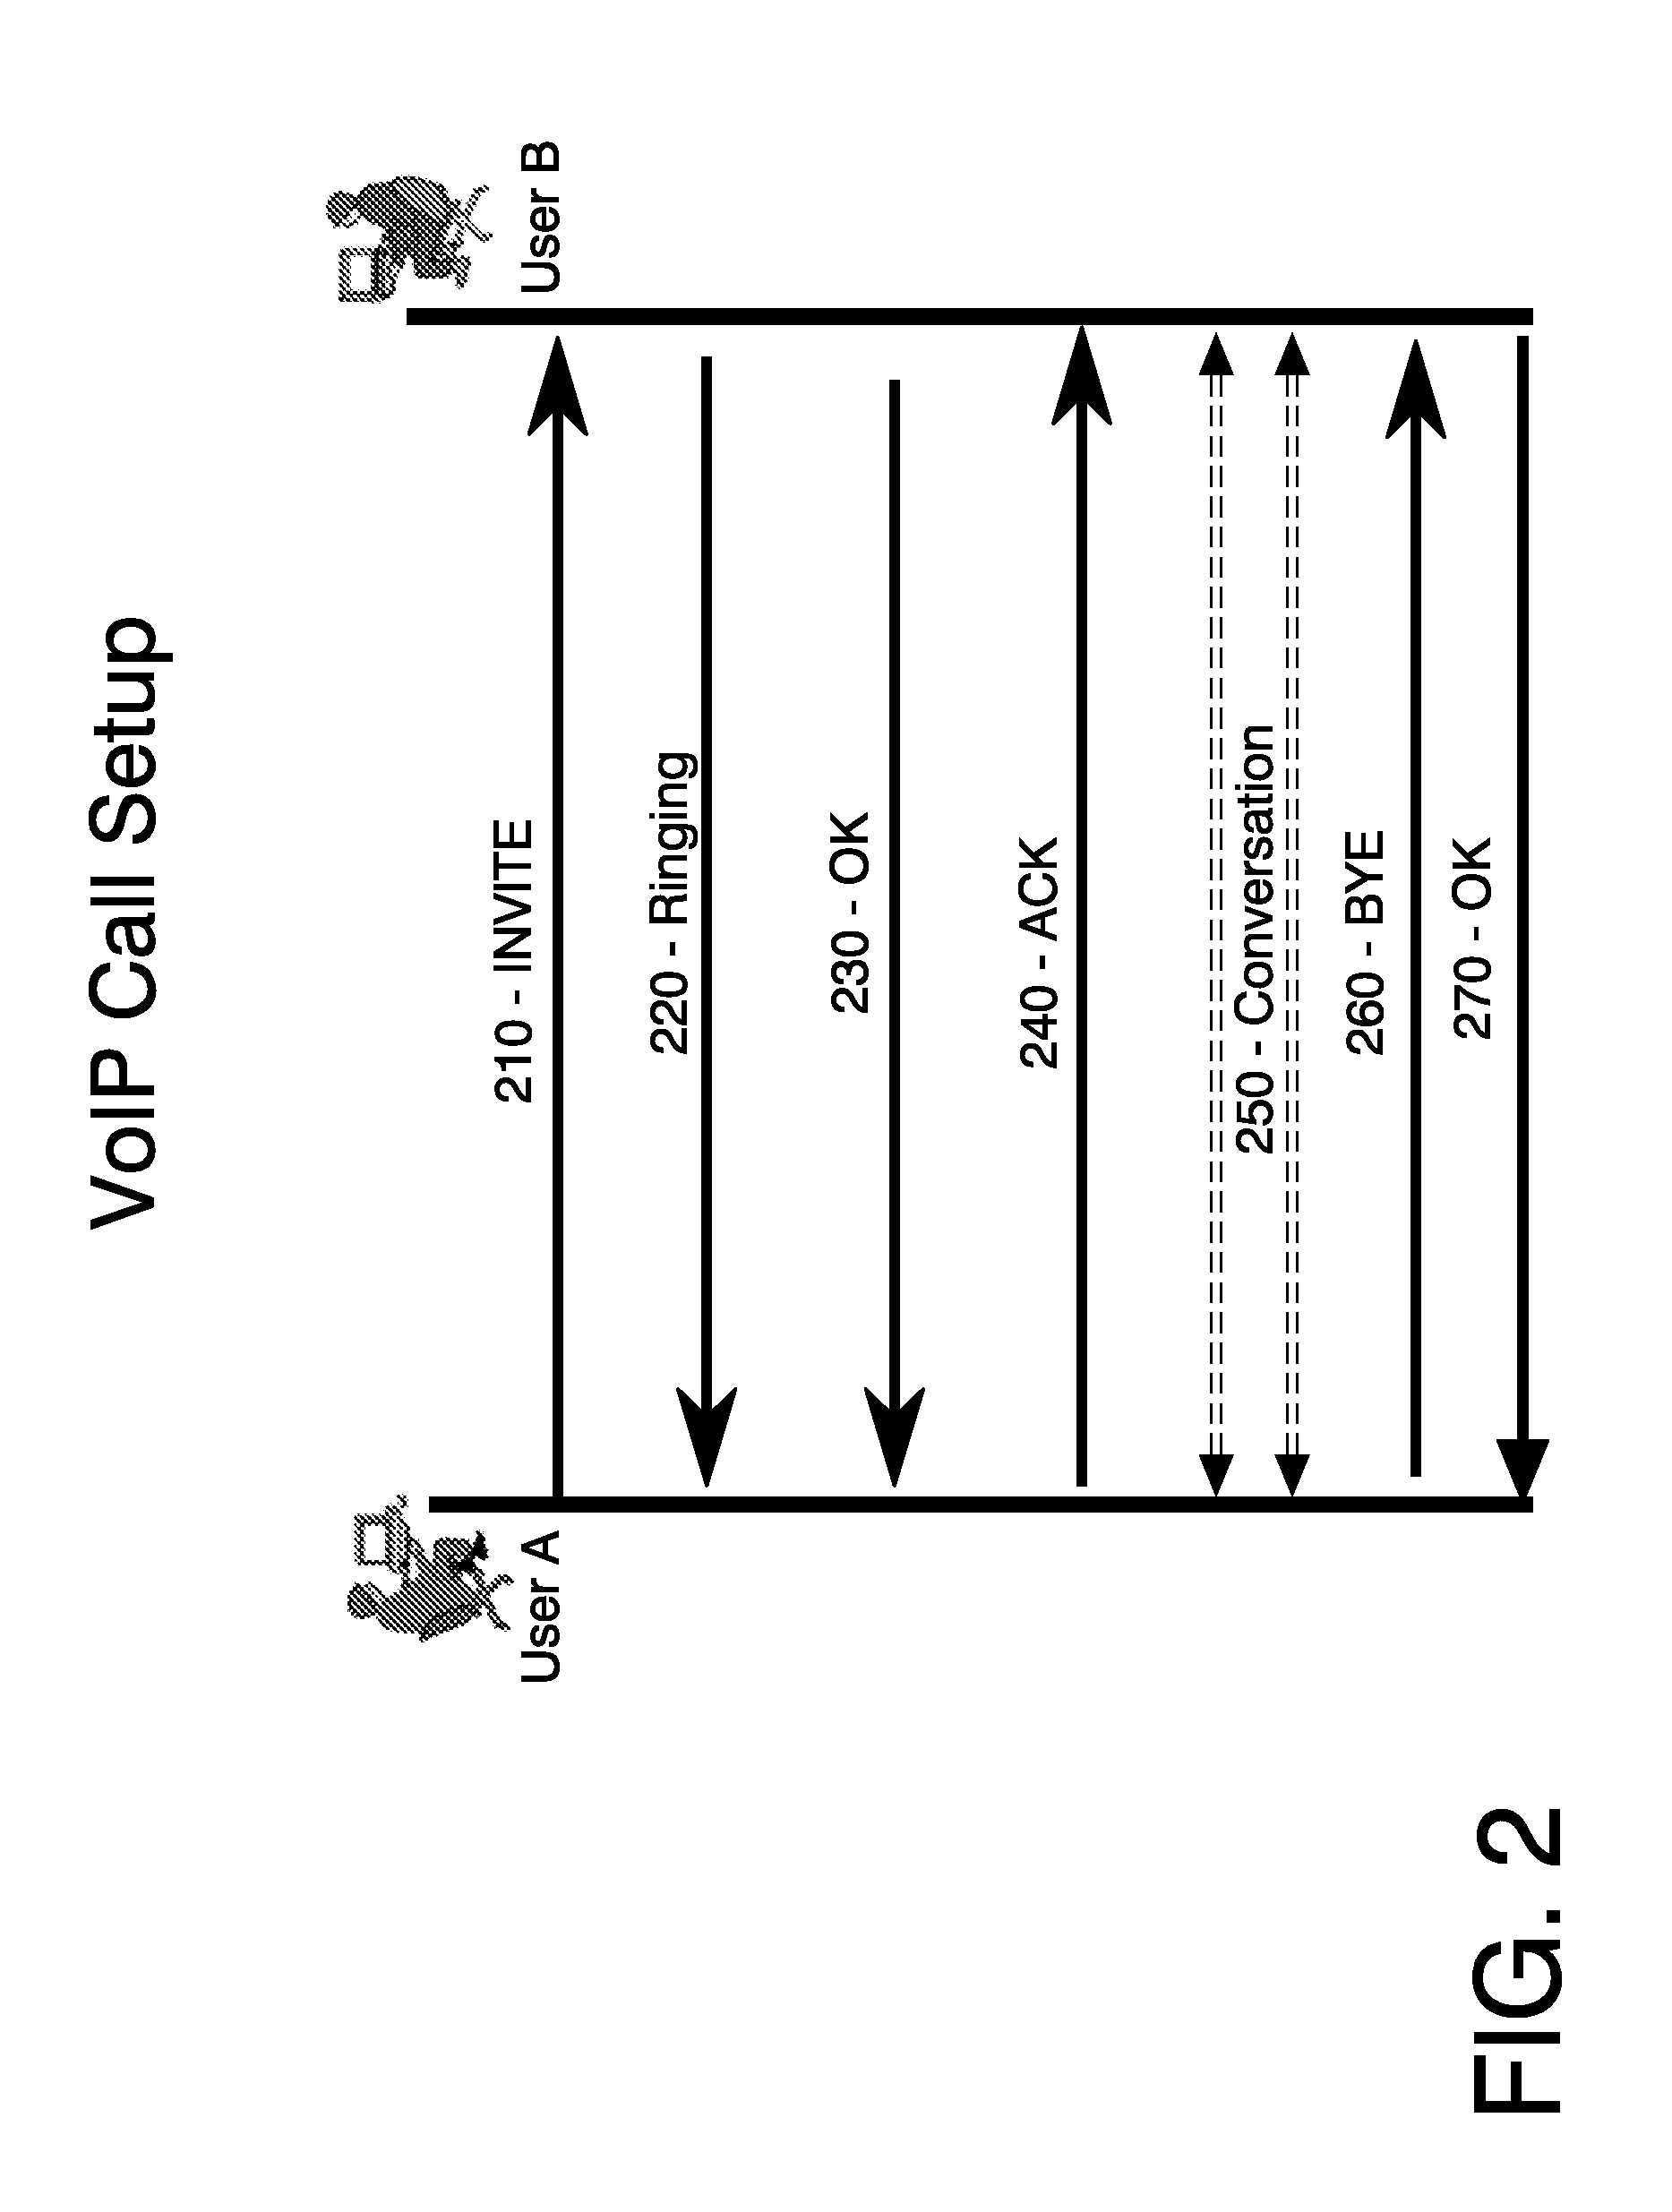 Call set-up in a communication network